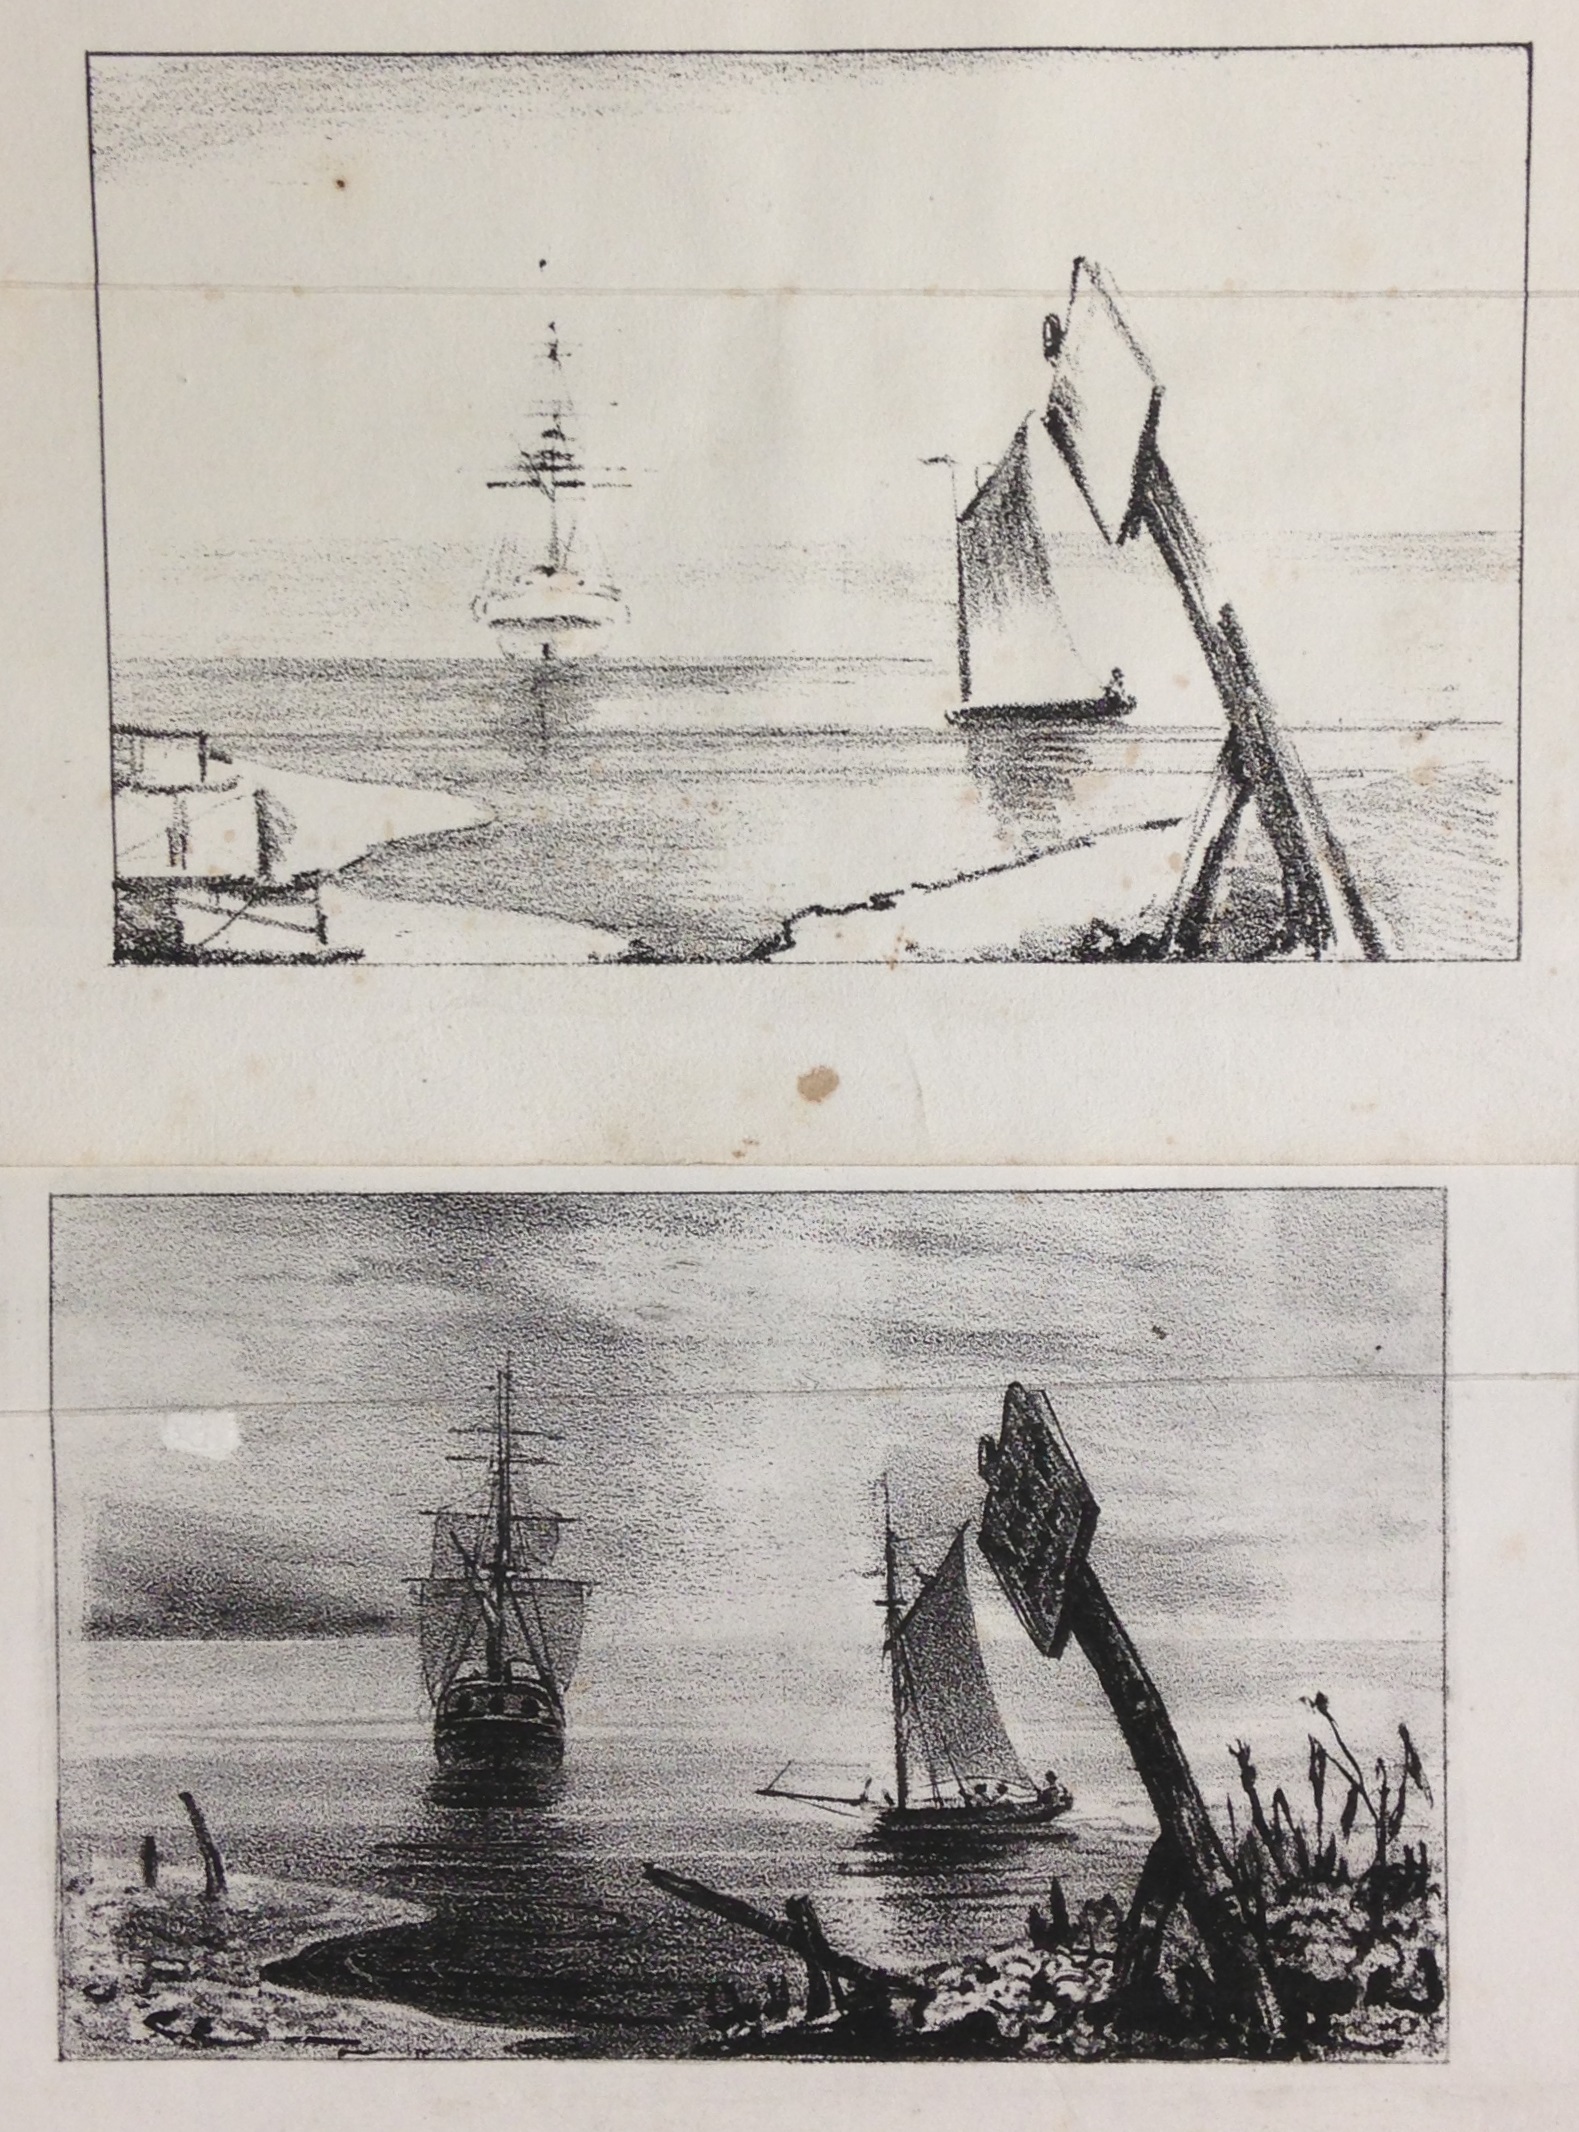 Two stages in the creation of a lithographic image, from Alphonse Chevallier, Mémoire sur l’art du lithographe (Paris, [1829])  (NE2420 .C54 1829)